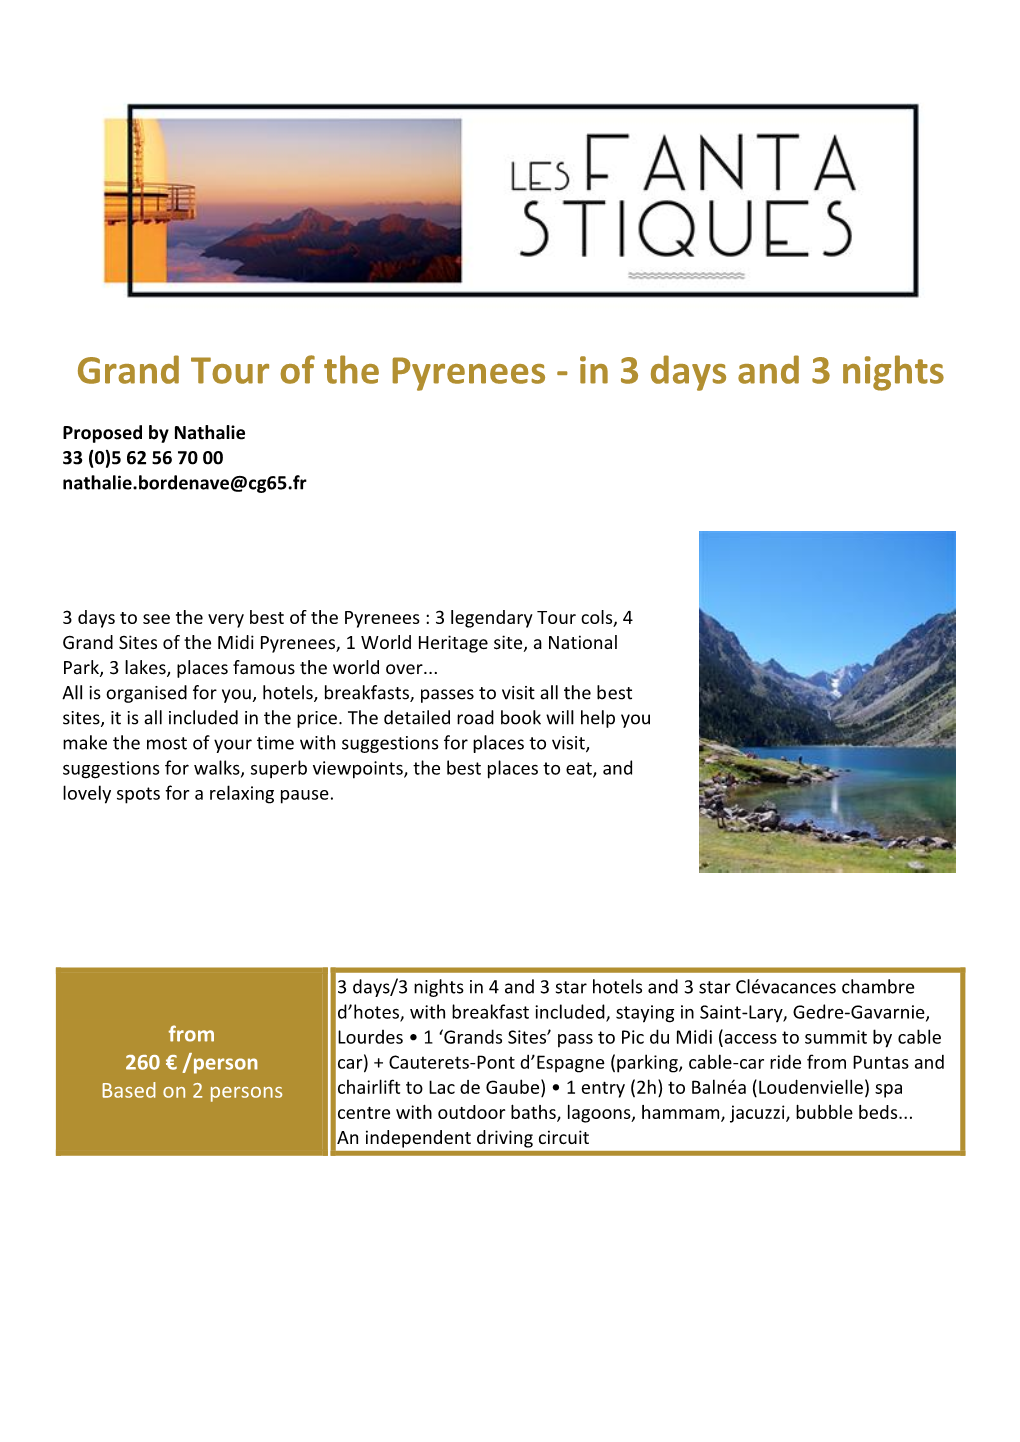 Grand Tour of the Pyrenees - in 3 Days and 3 Nights